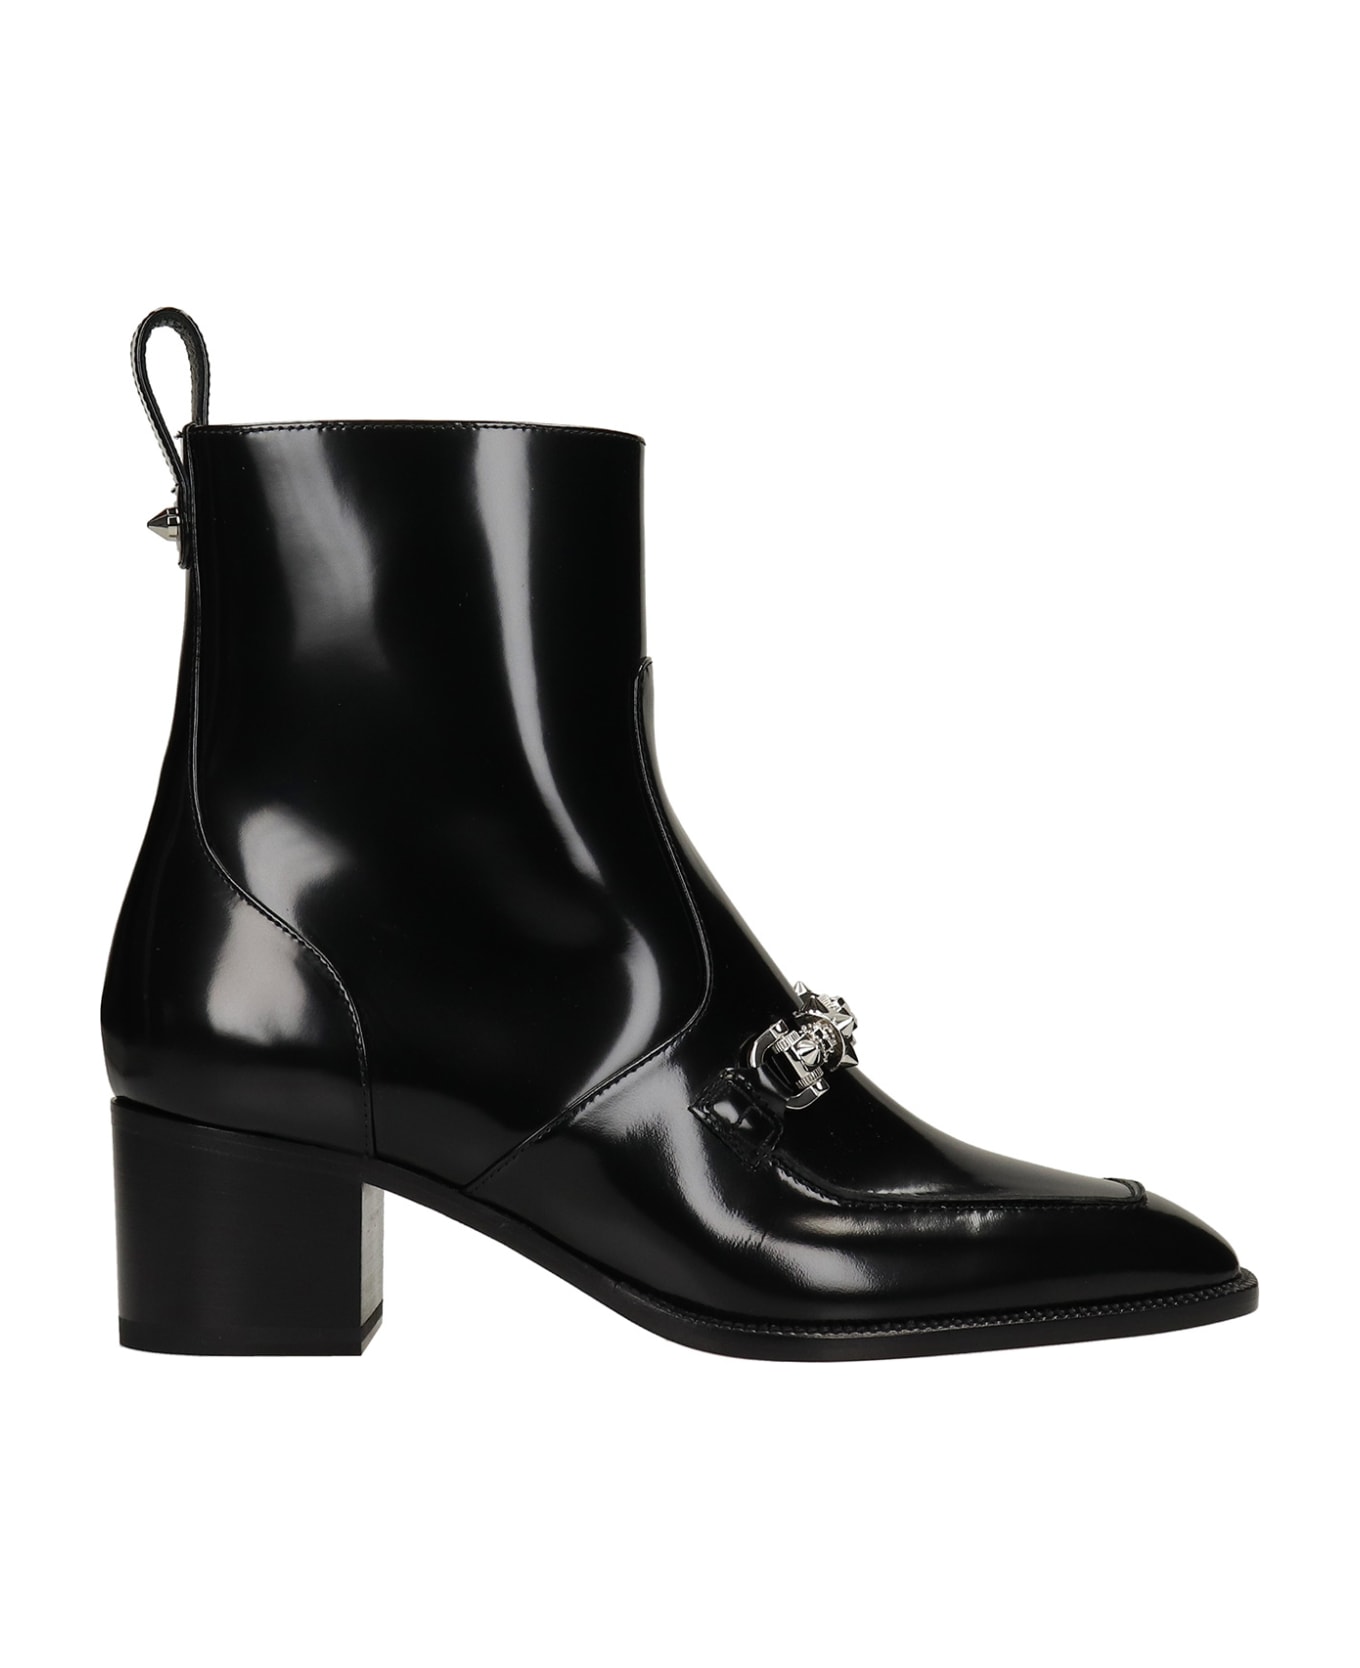 Christian Louboutin Mayerswing High Heels Ankle Boots In Black Leather - black